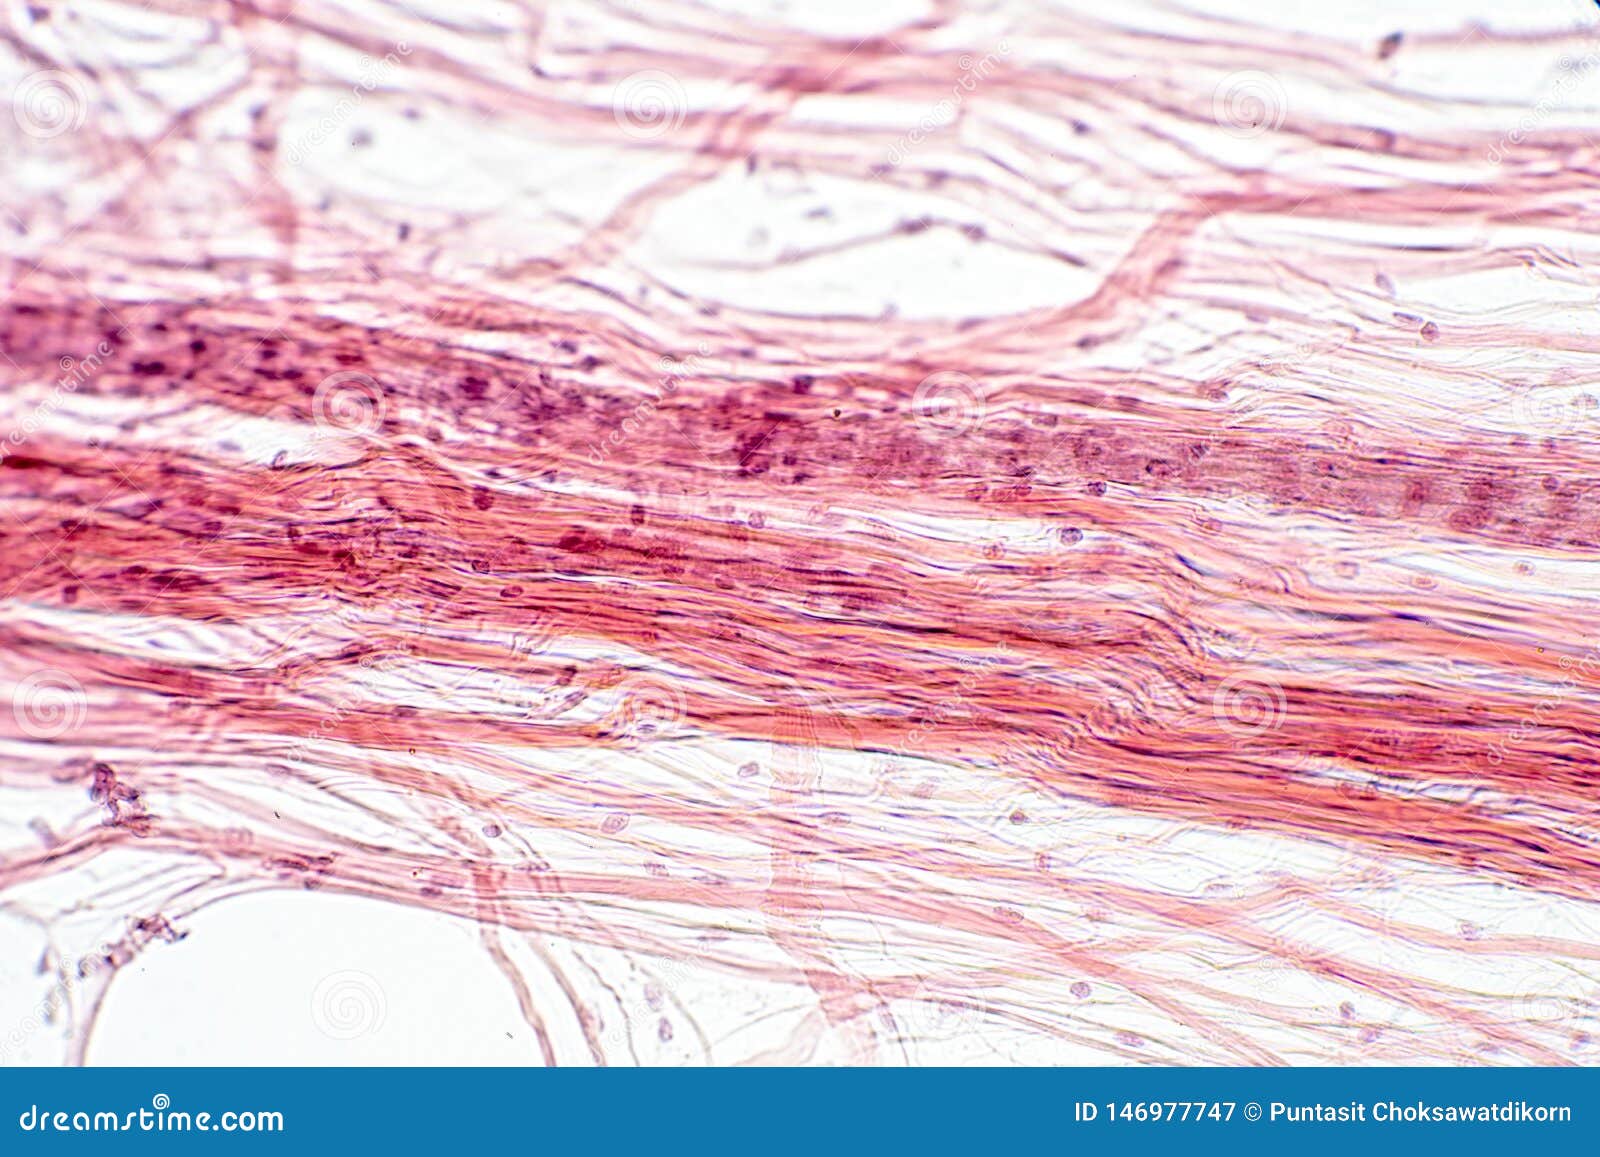 areolar connective tissue under the microscope view